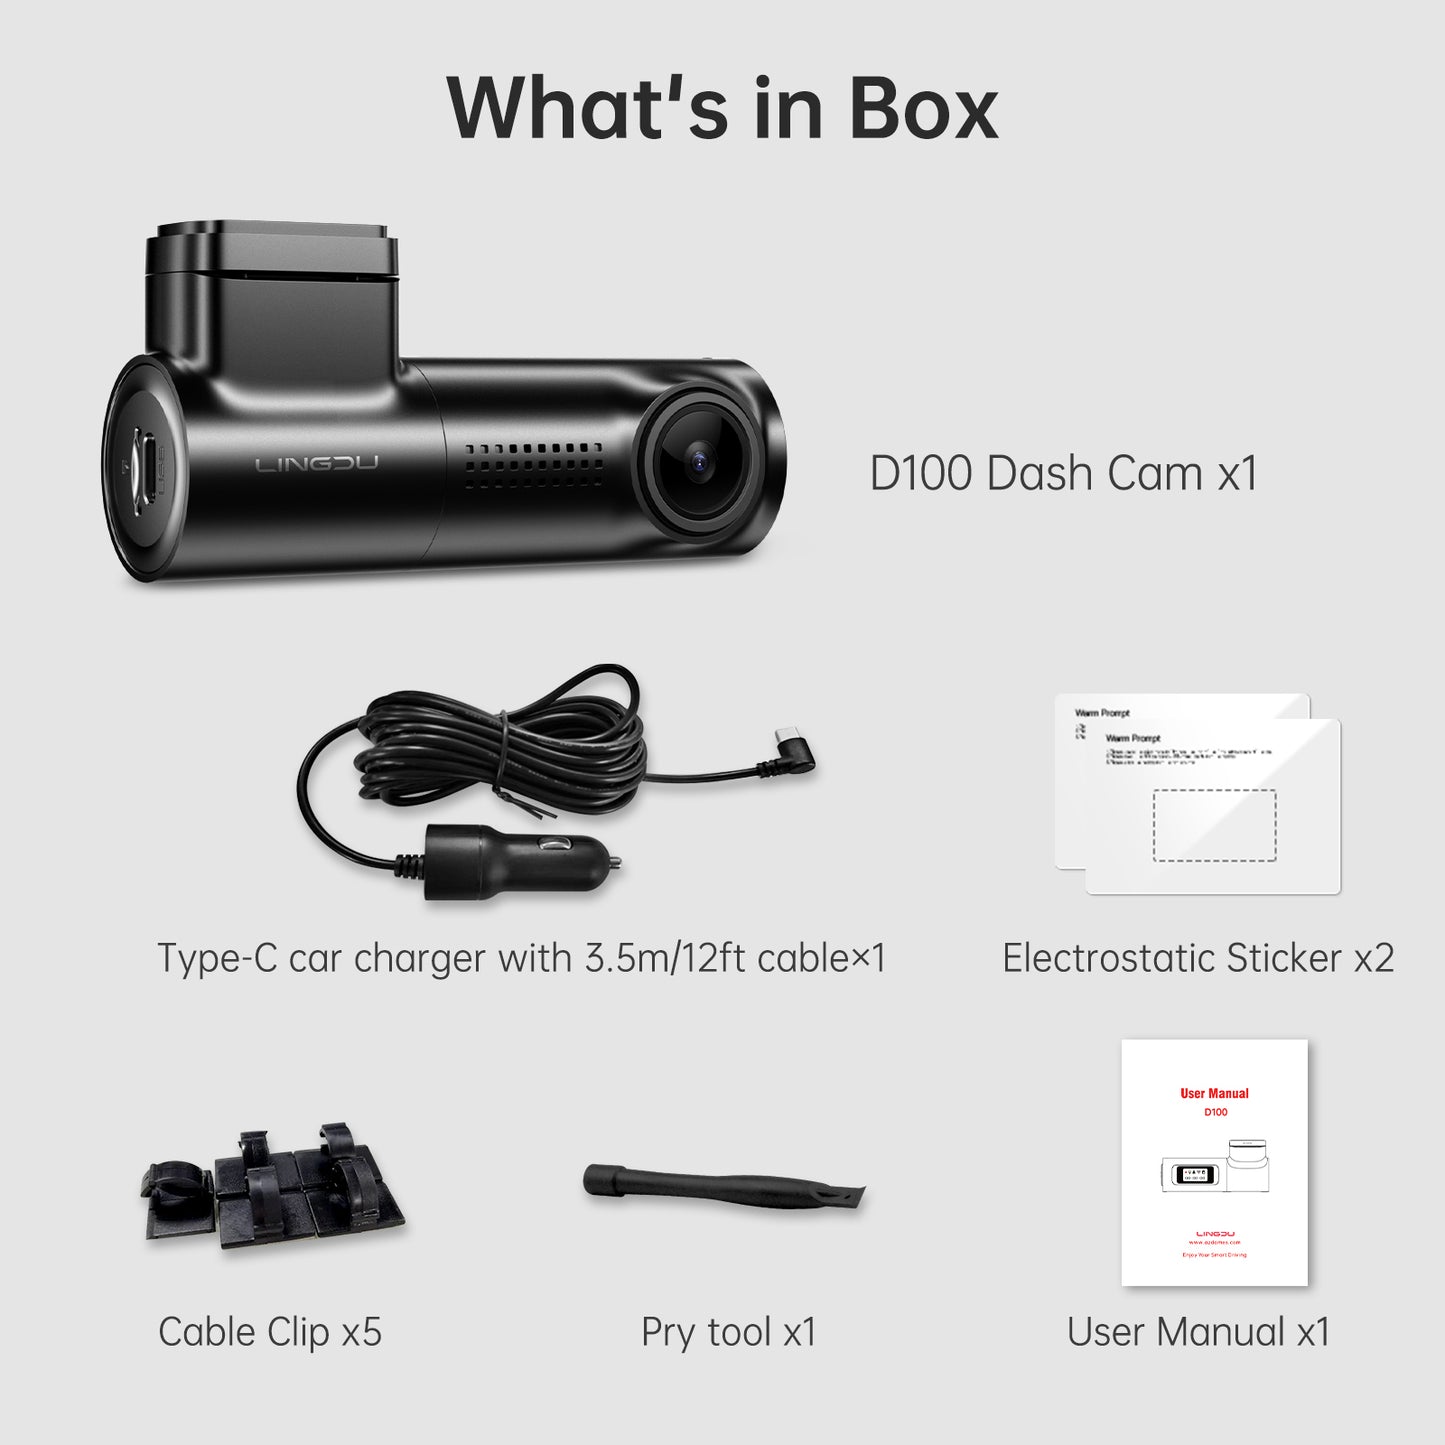 LINGDU D100 Wireless Dash Cam - The 2K HDR Smart Dash Camera with Built-in WIFI and GPS